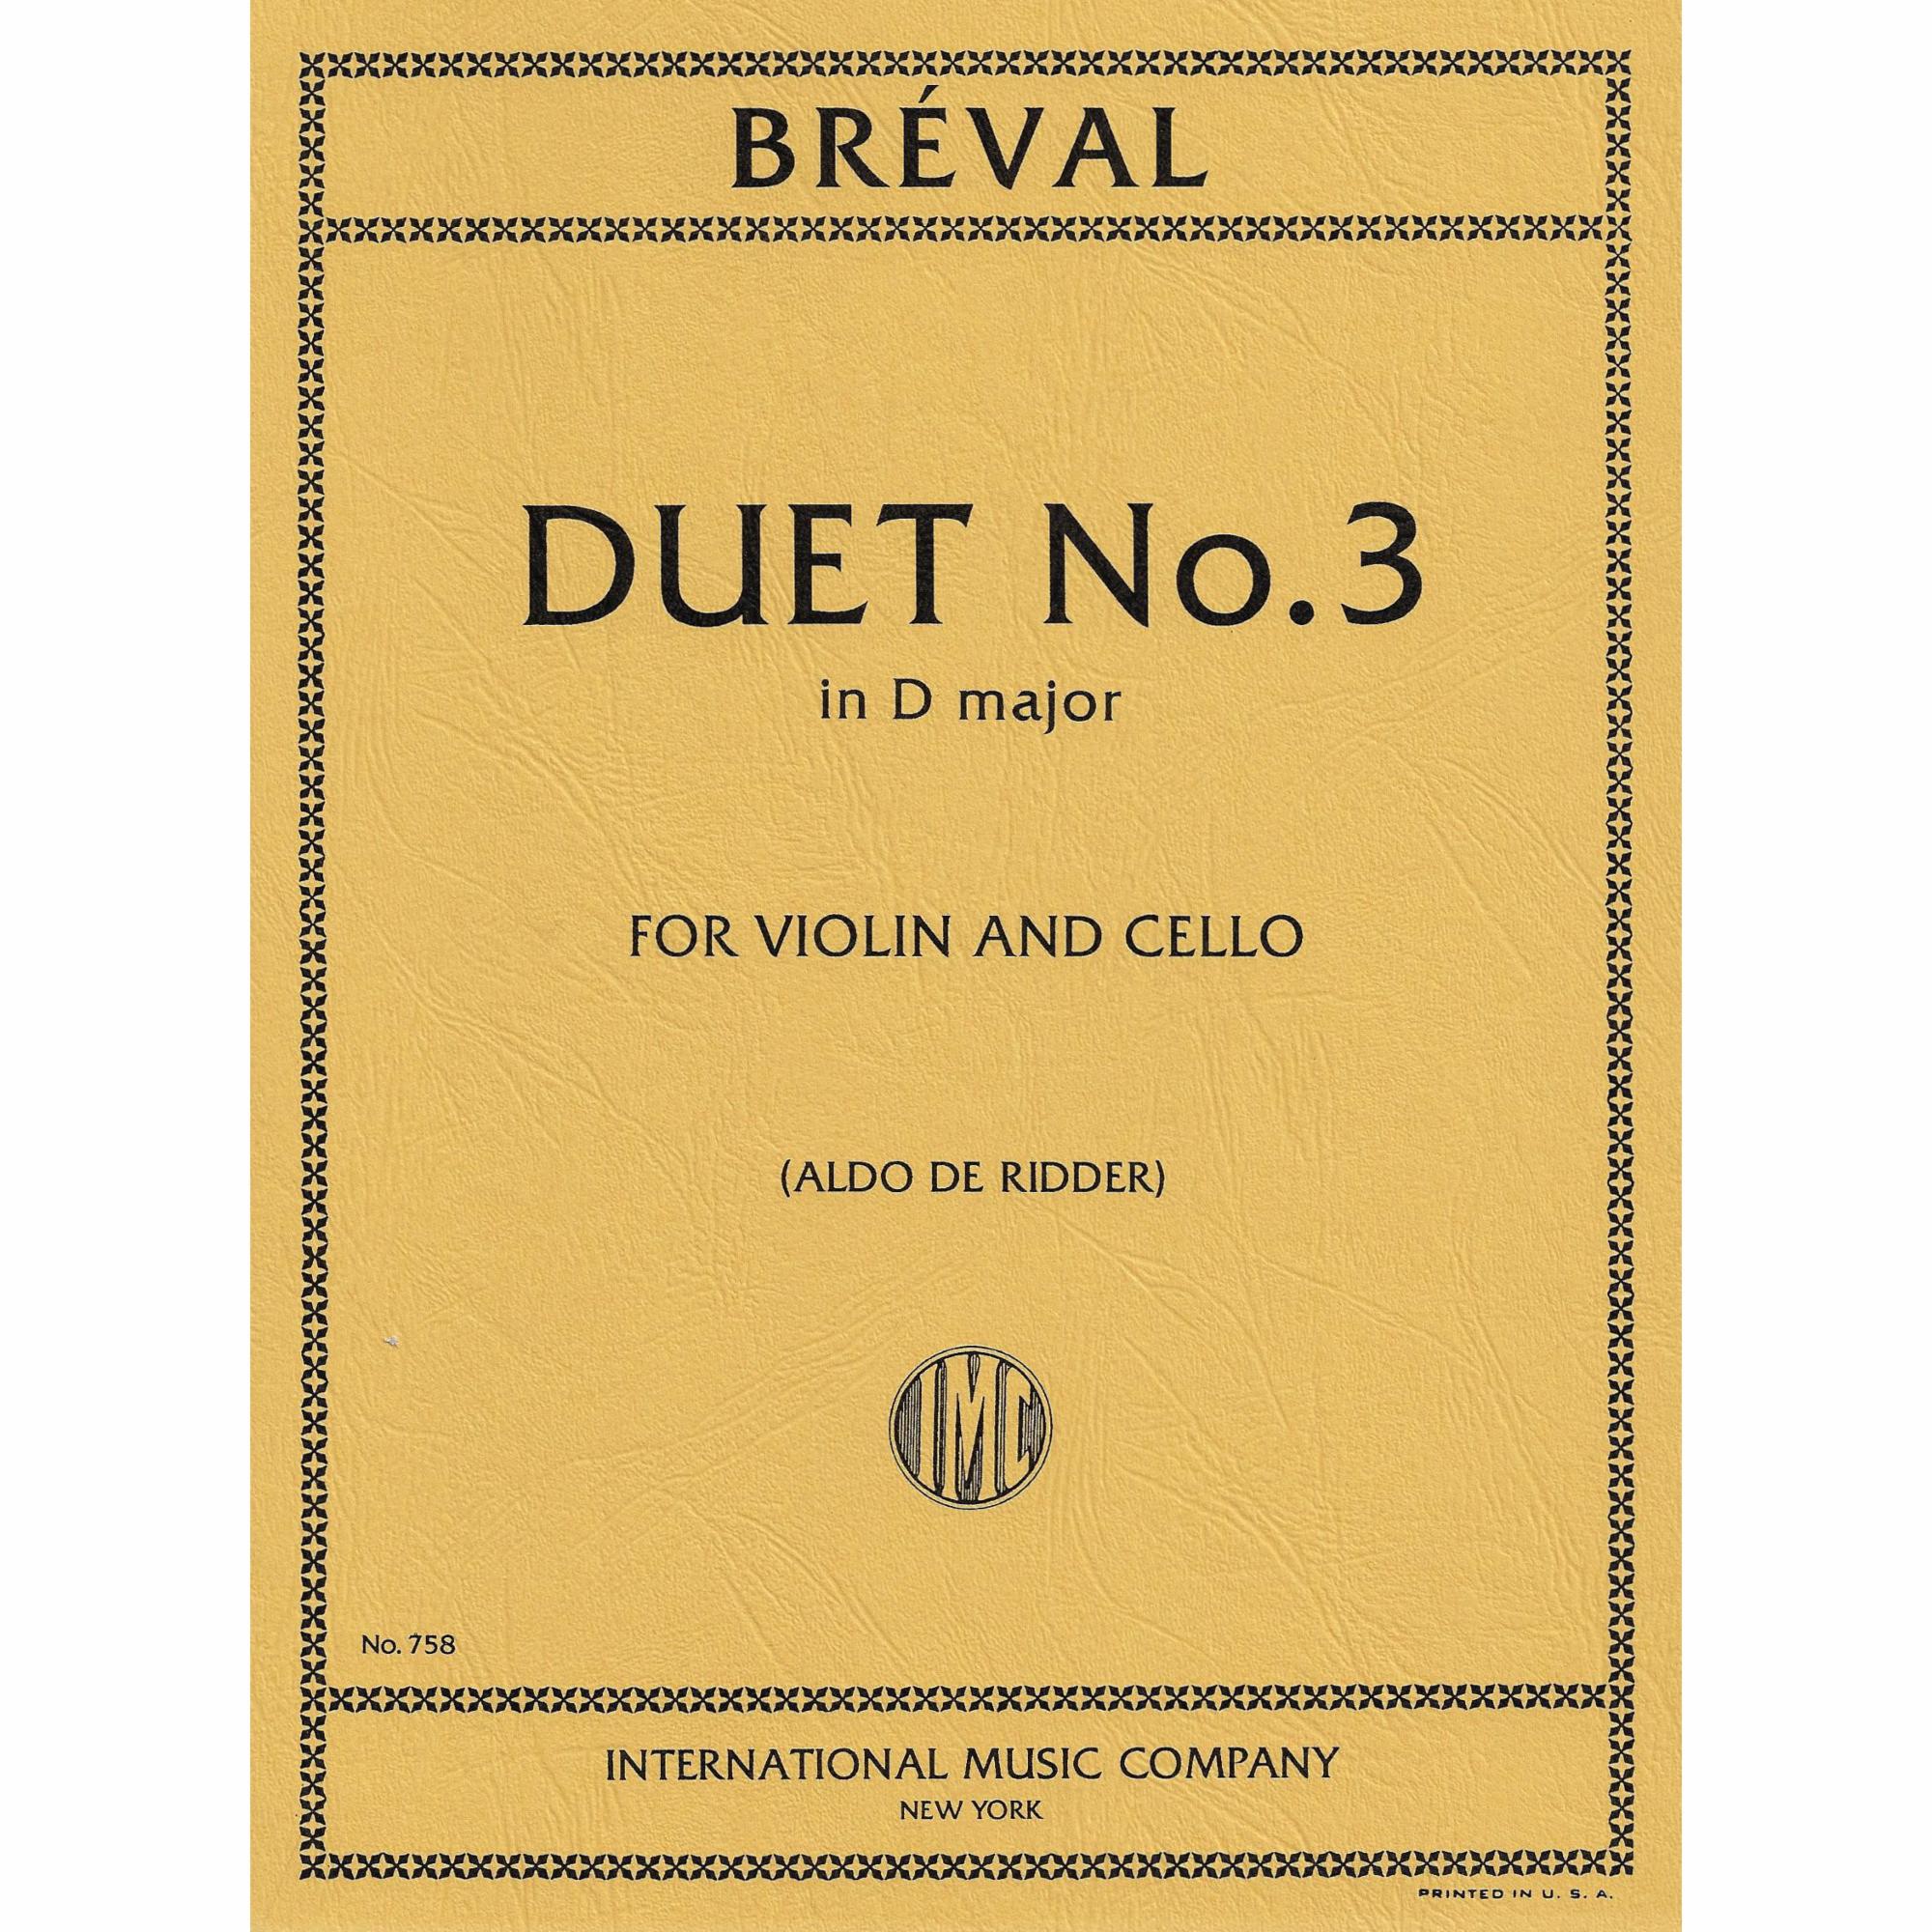 Breval -- Duet No. 3 in D Major for Violin and Cello